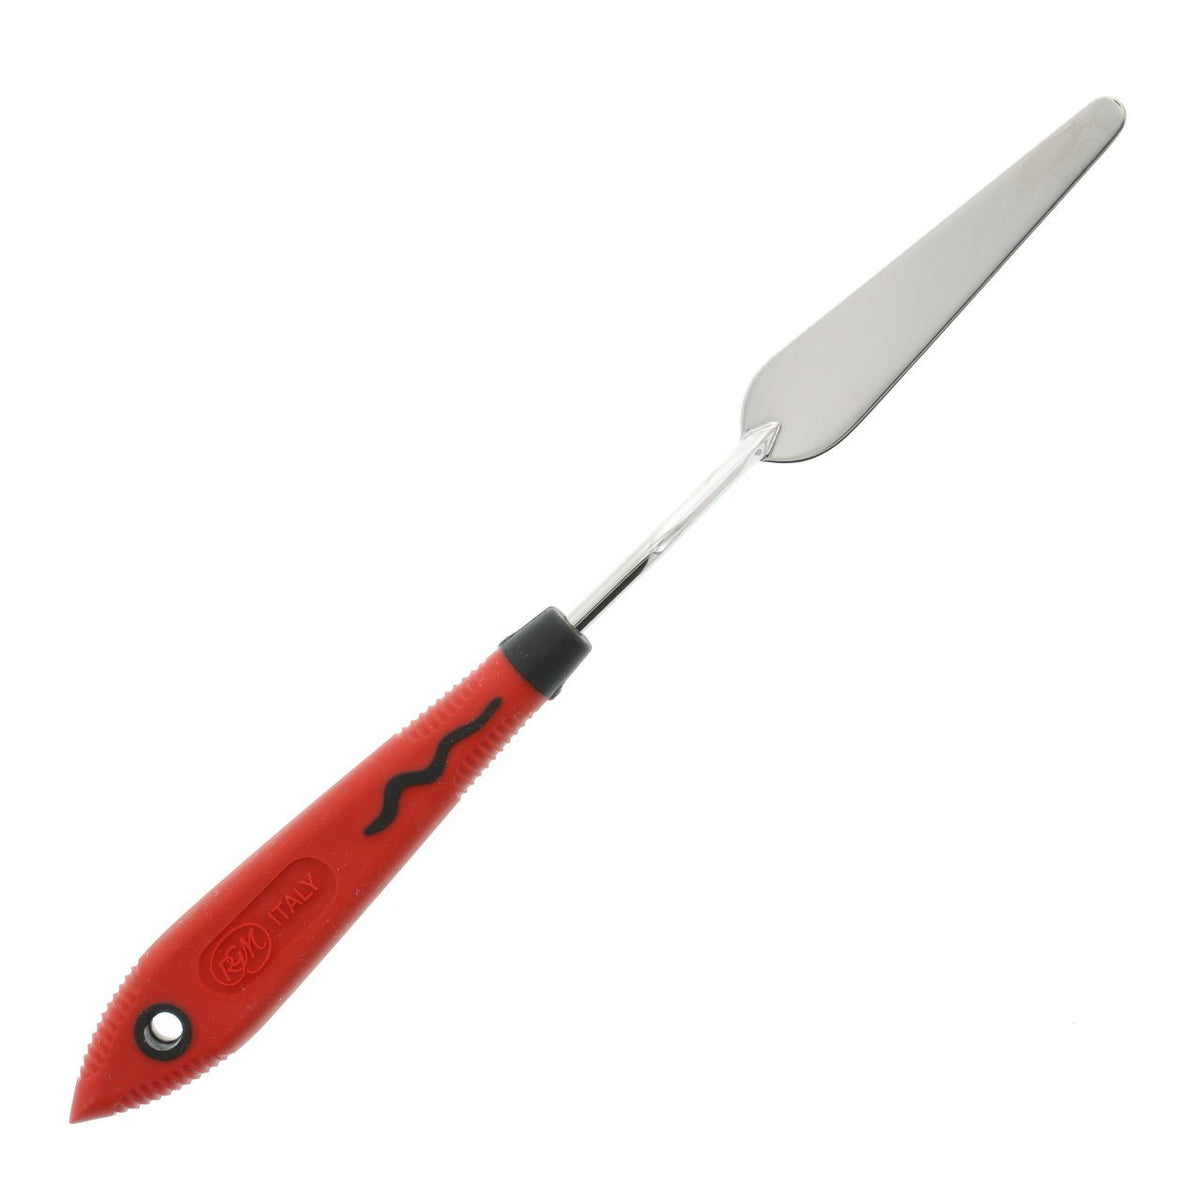 RGM Soft Grip Painting Knife #014 (Red Handle) - merriartist.com